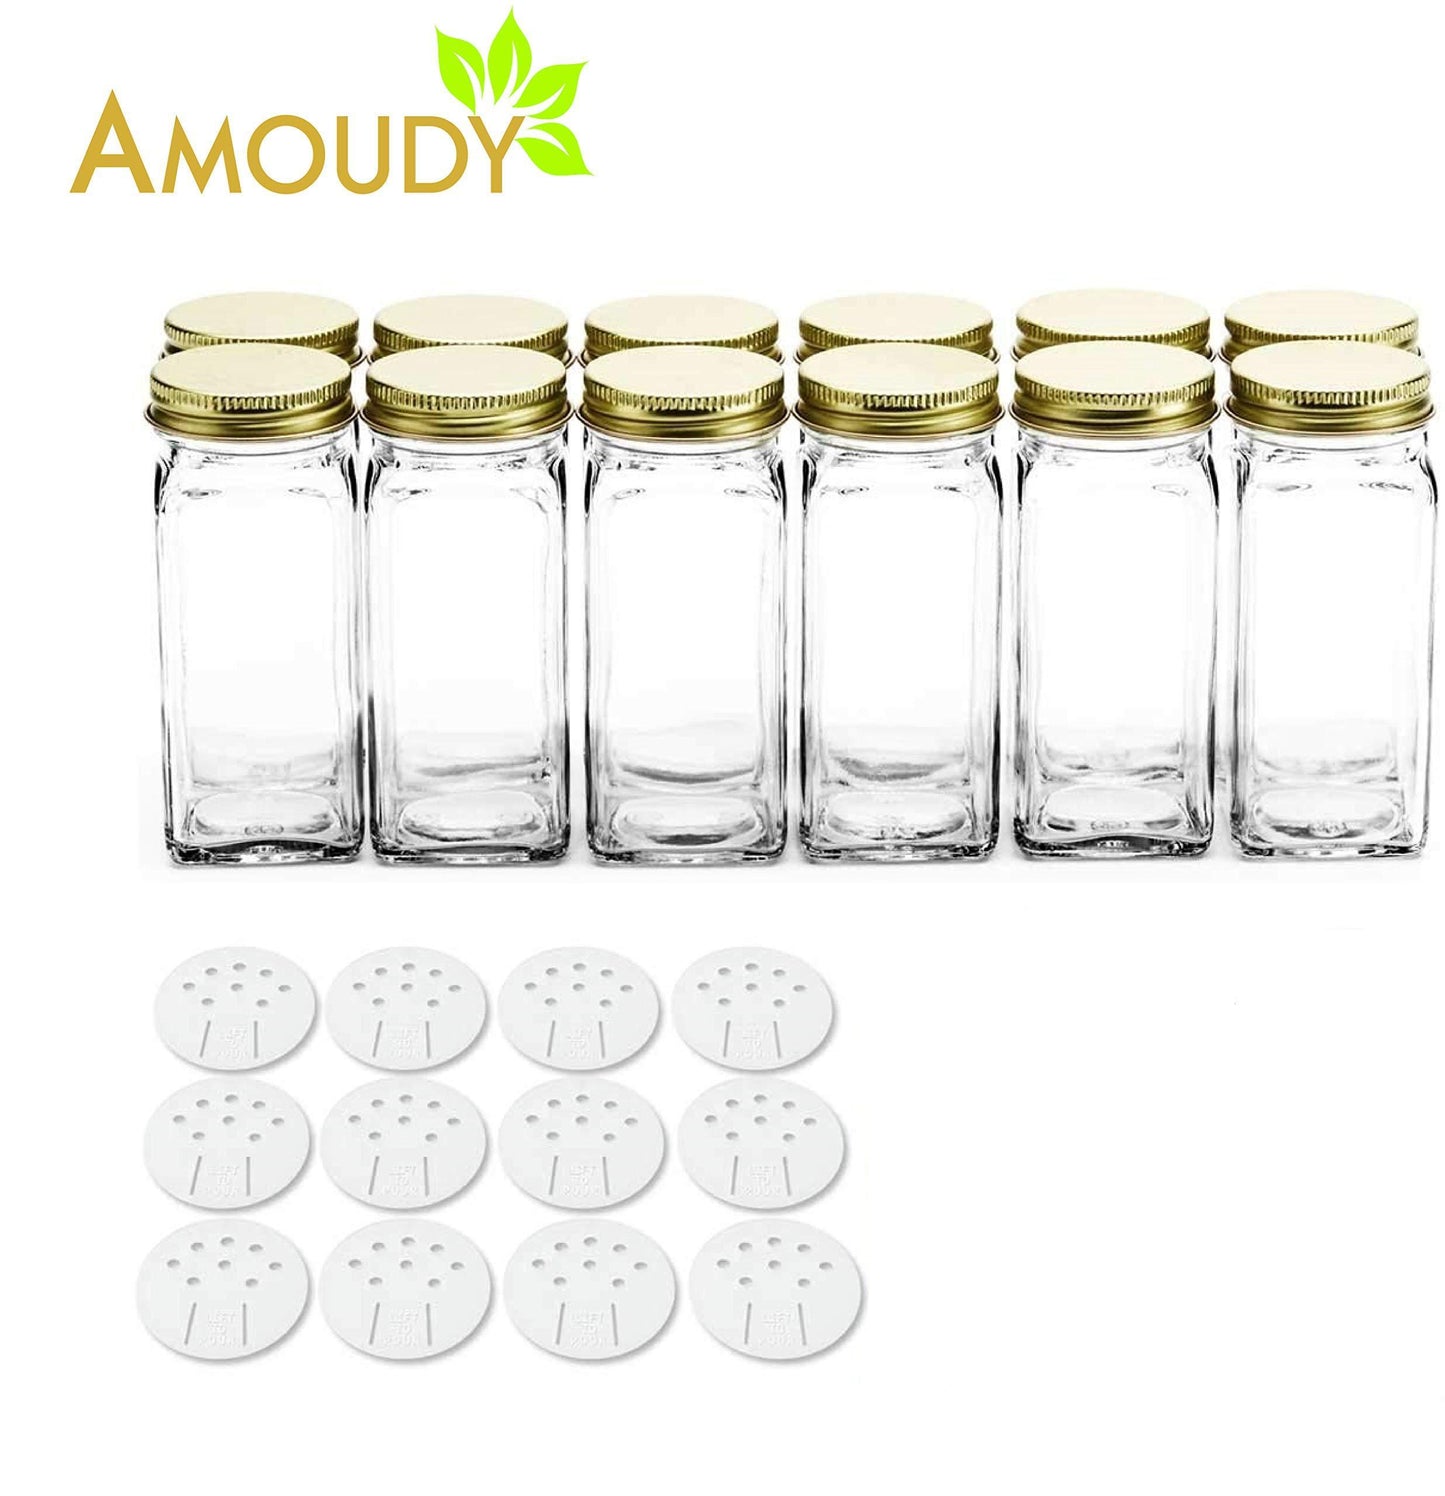 Home 12 square clear glass bottles containers jars 4oz with gold metal lids and shaker tops empty organizer set deluxe decorative modern spices seasoning food crafts gifts